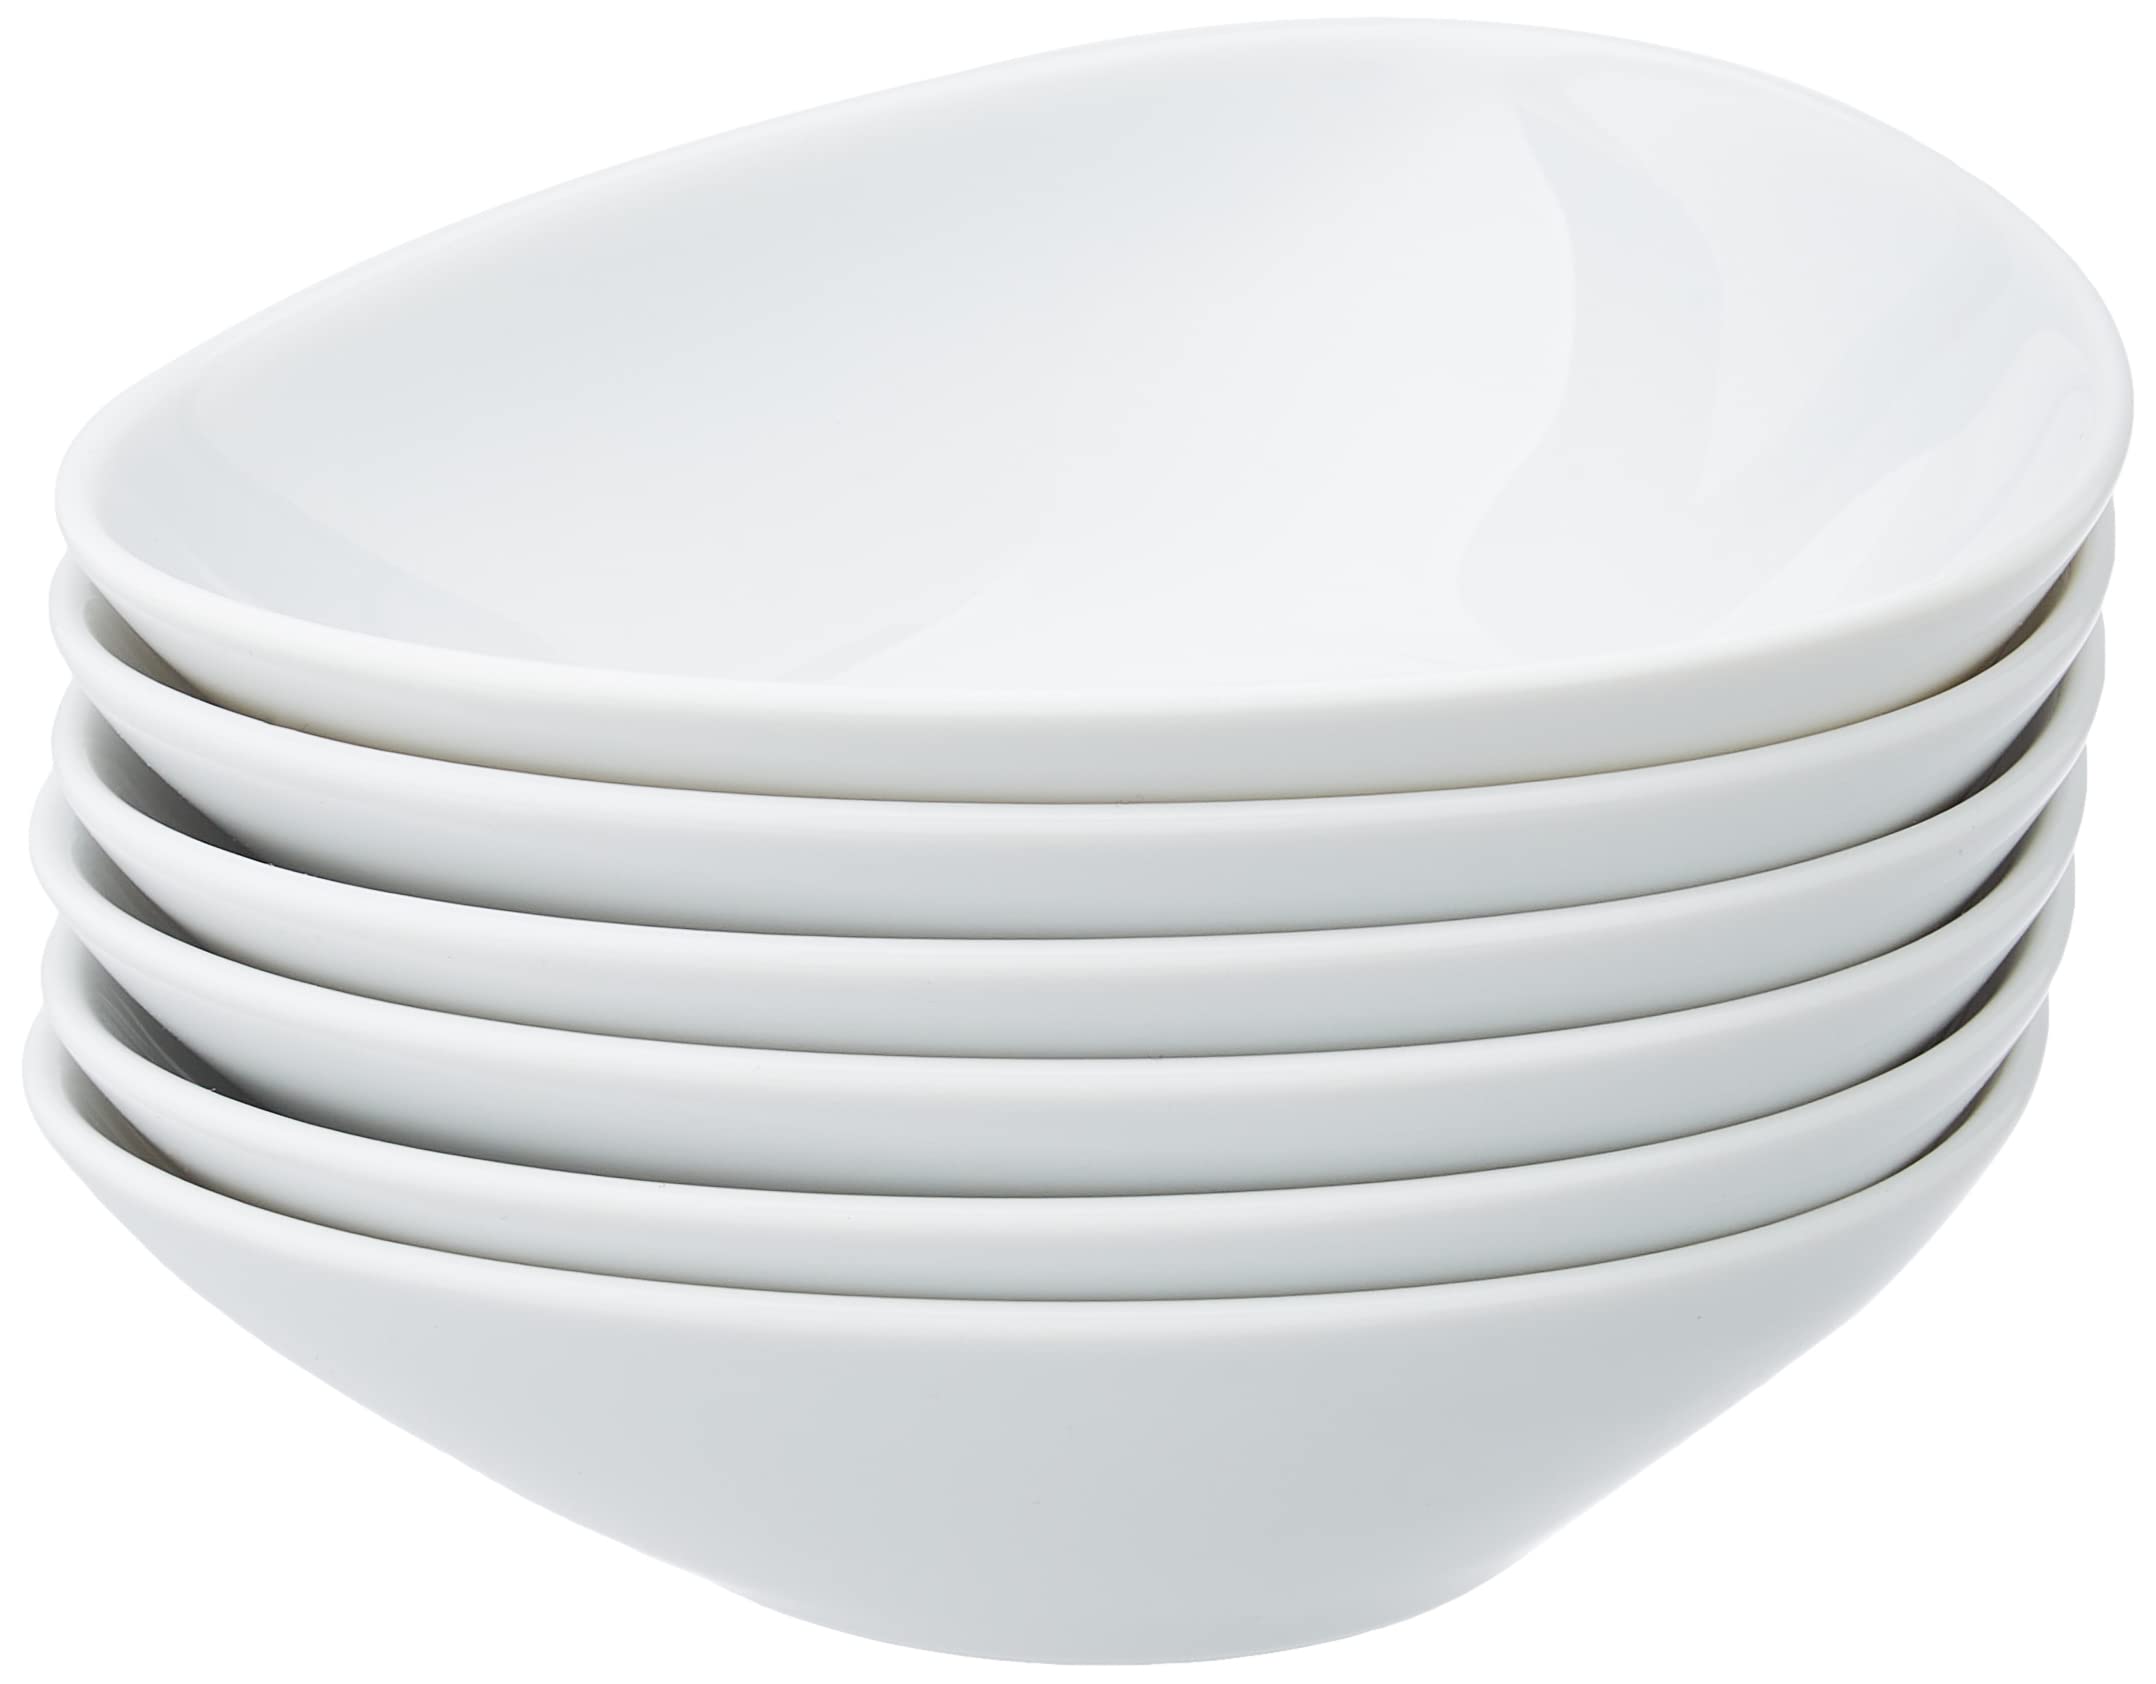 Alessi Colombina 5-3/4-Inch by 5-Inch by 10-1/4-Inch Serving Bowl shallow, White Porcelain, Set of 6